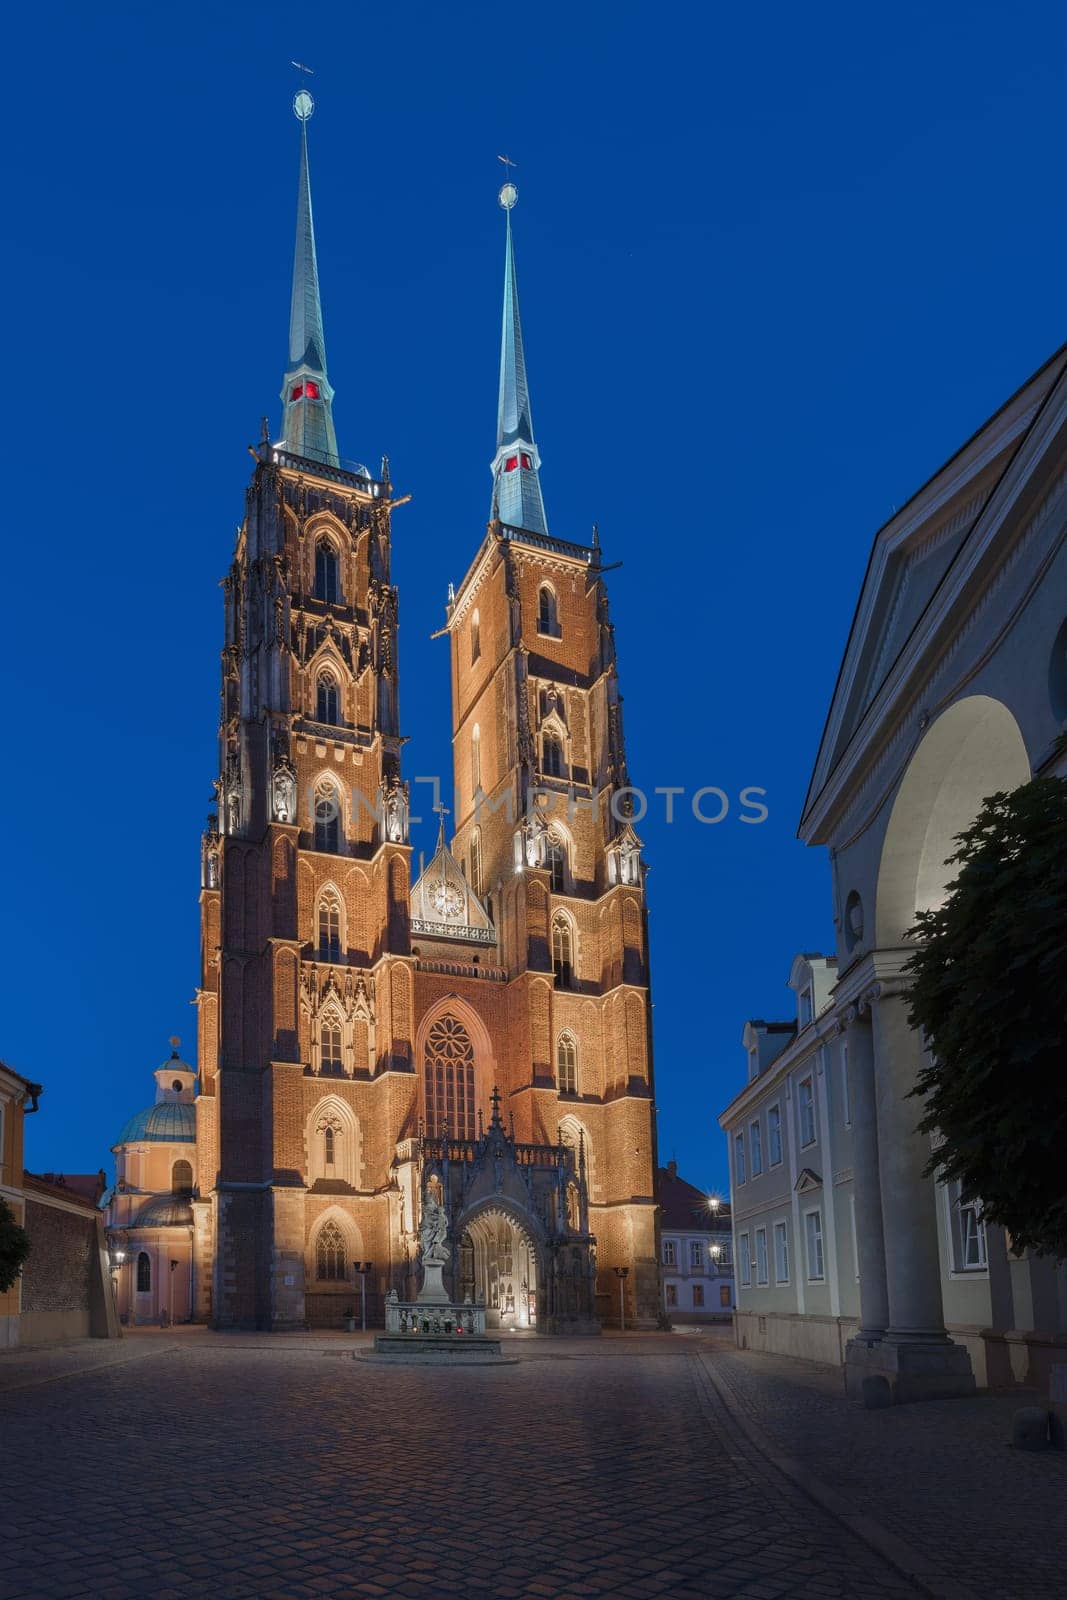 The Cathedral of St. John the Baptist in Wroclaw, is the seat of the Roman Catholic Archdiocese of Wroclaw and a landmark of the city of Wroclaw in Poland.